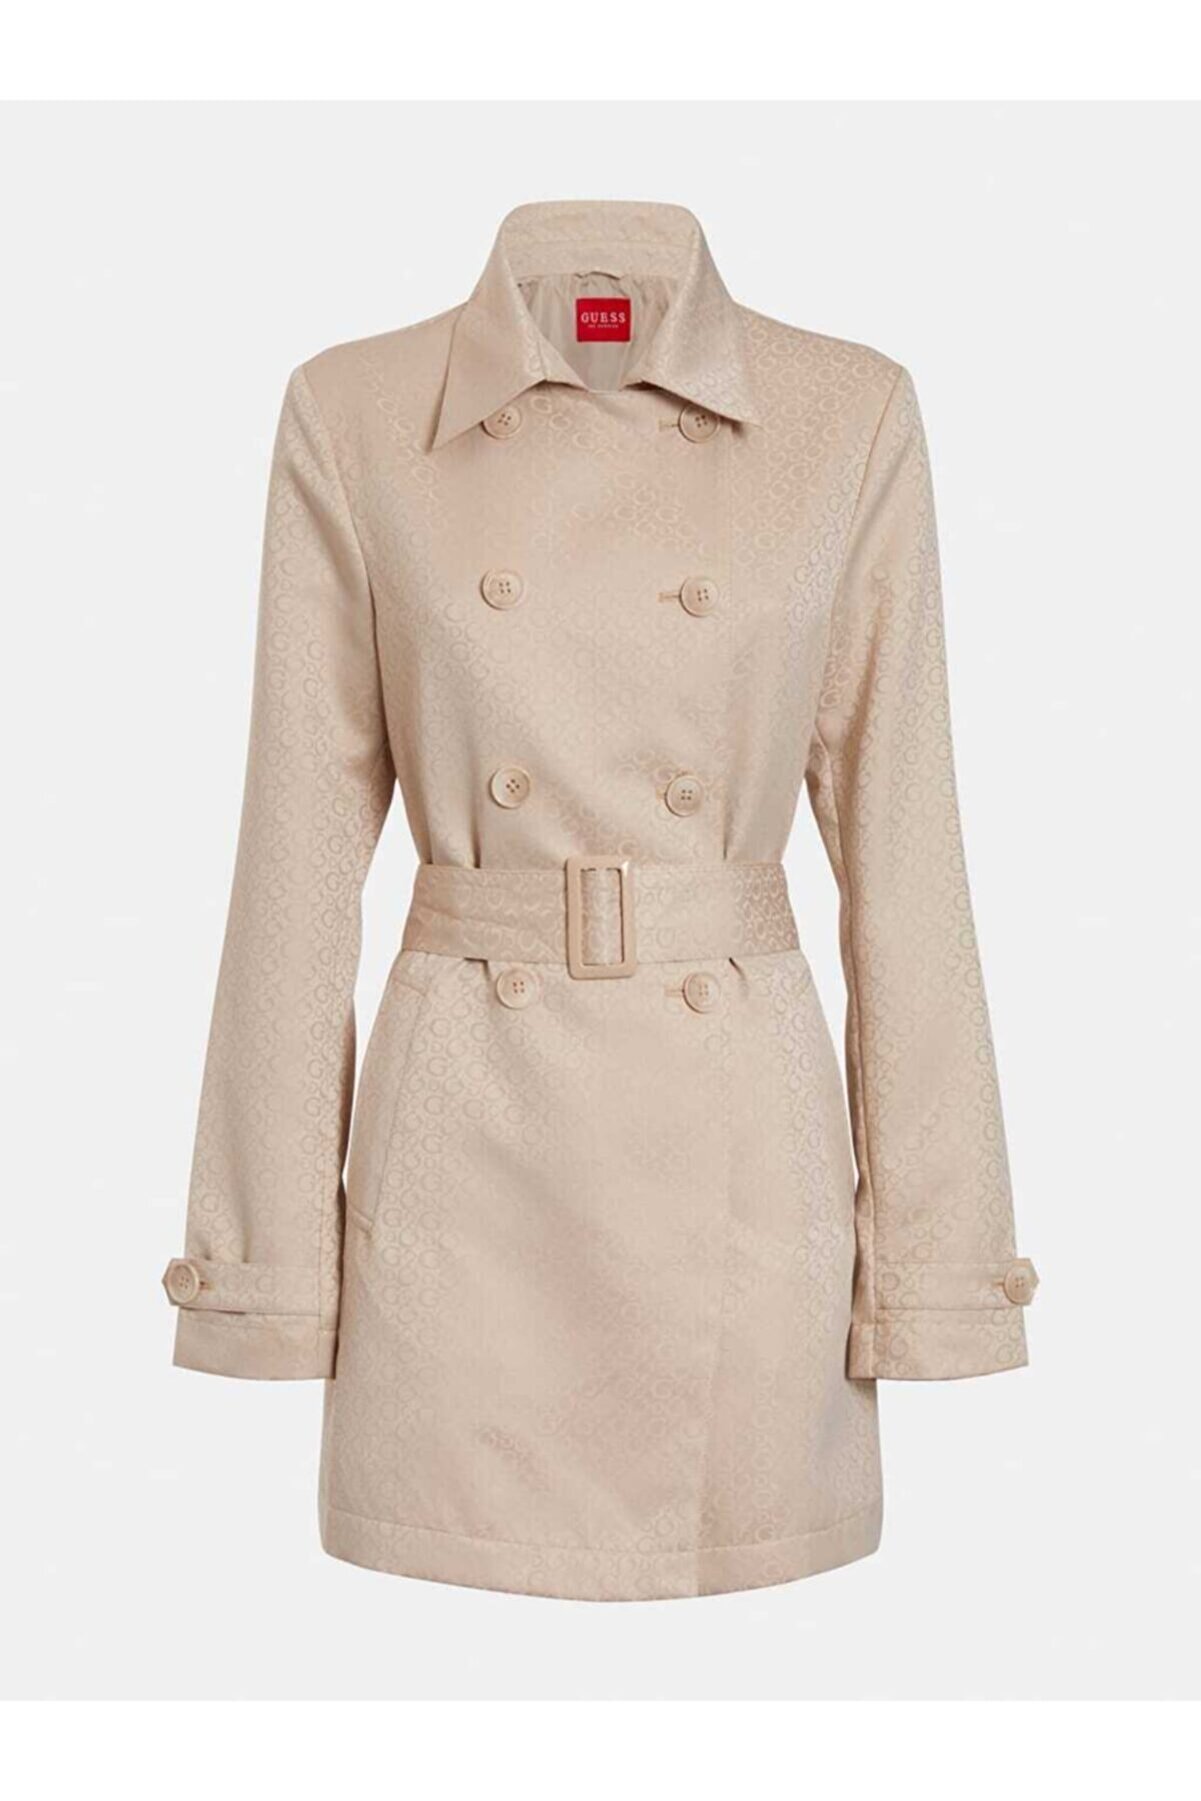 Guess Penelope Long Trench